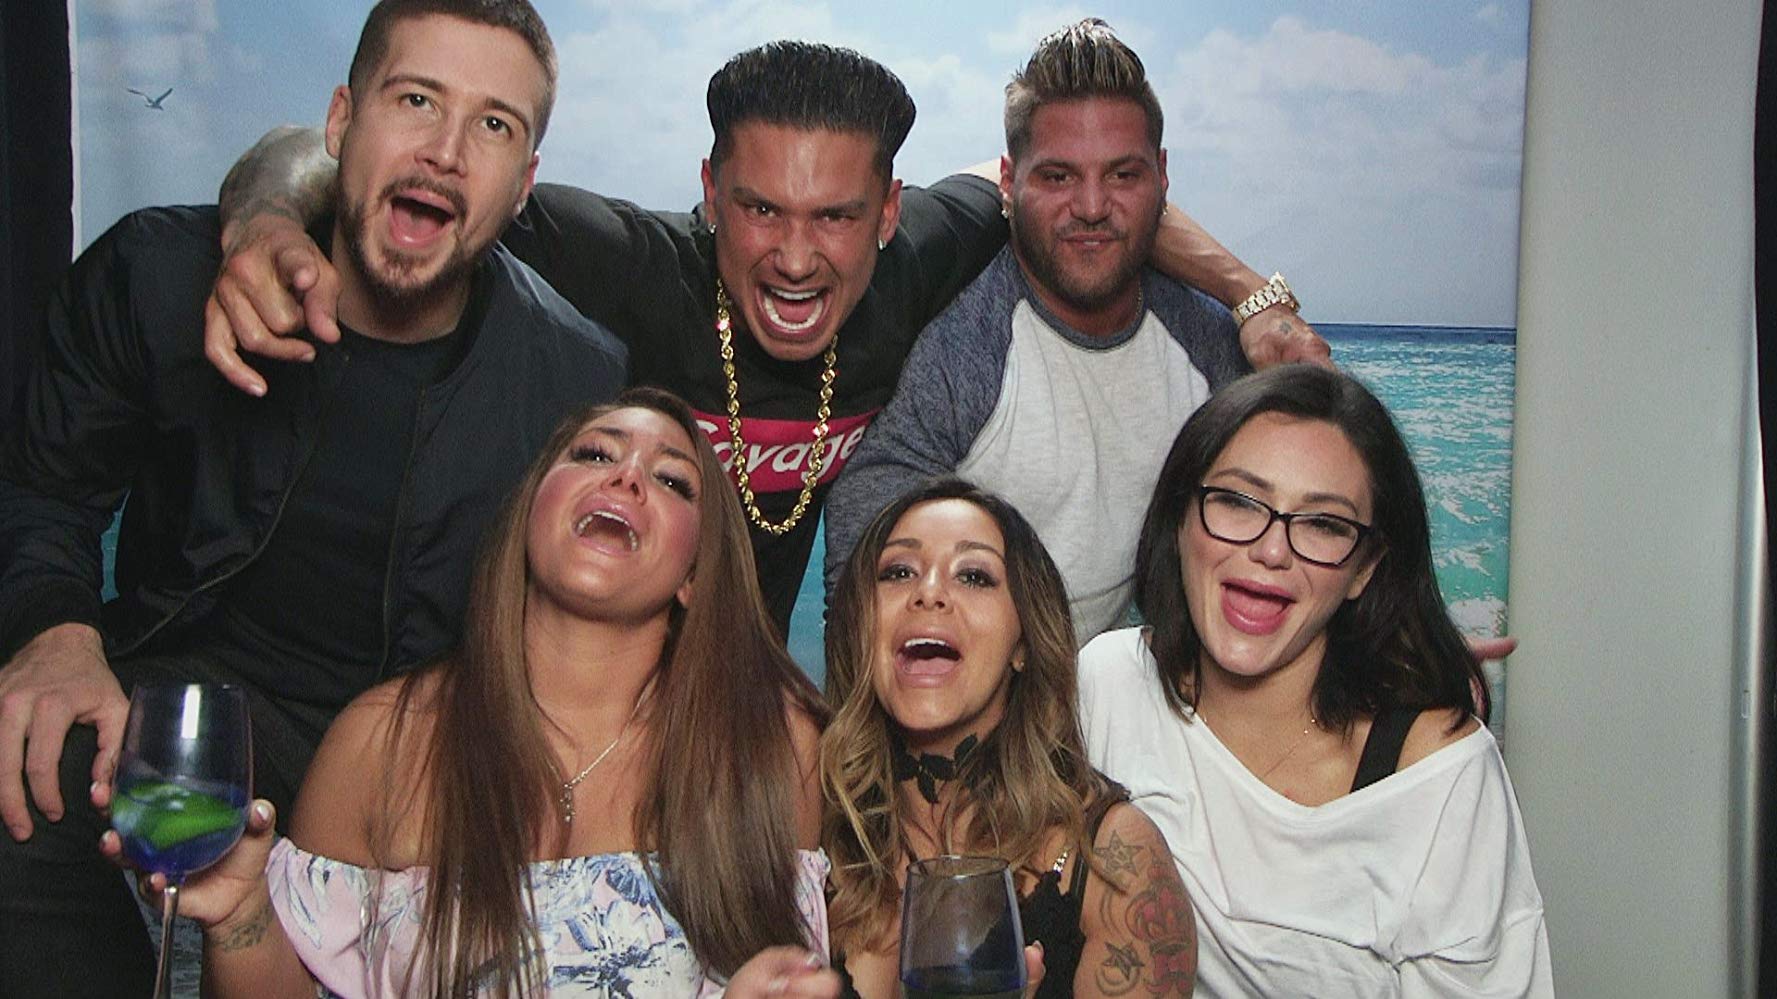 jersey shore family vacation season 2 episode 3 watch online